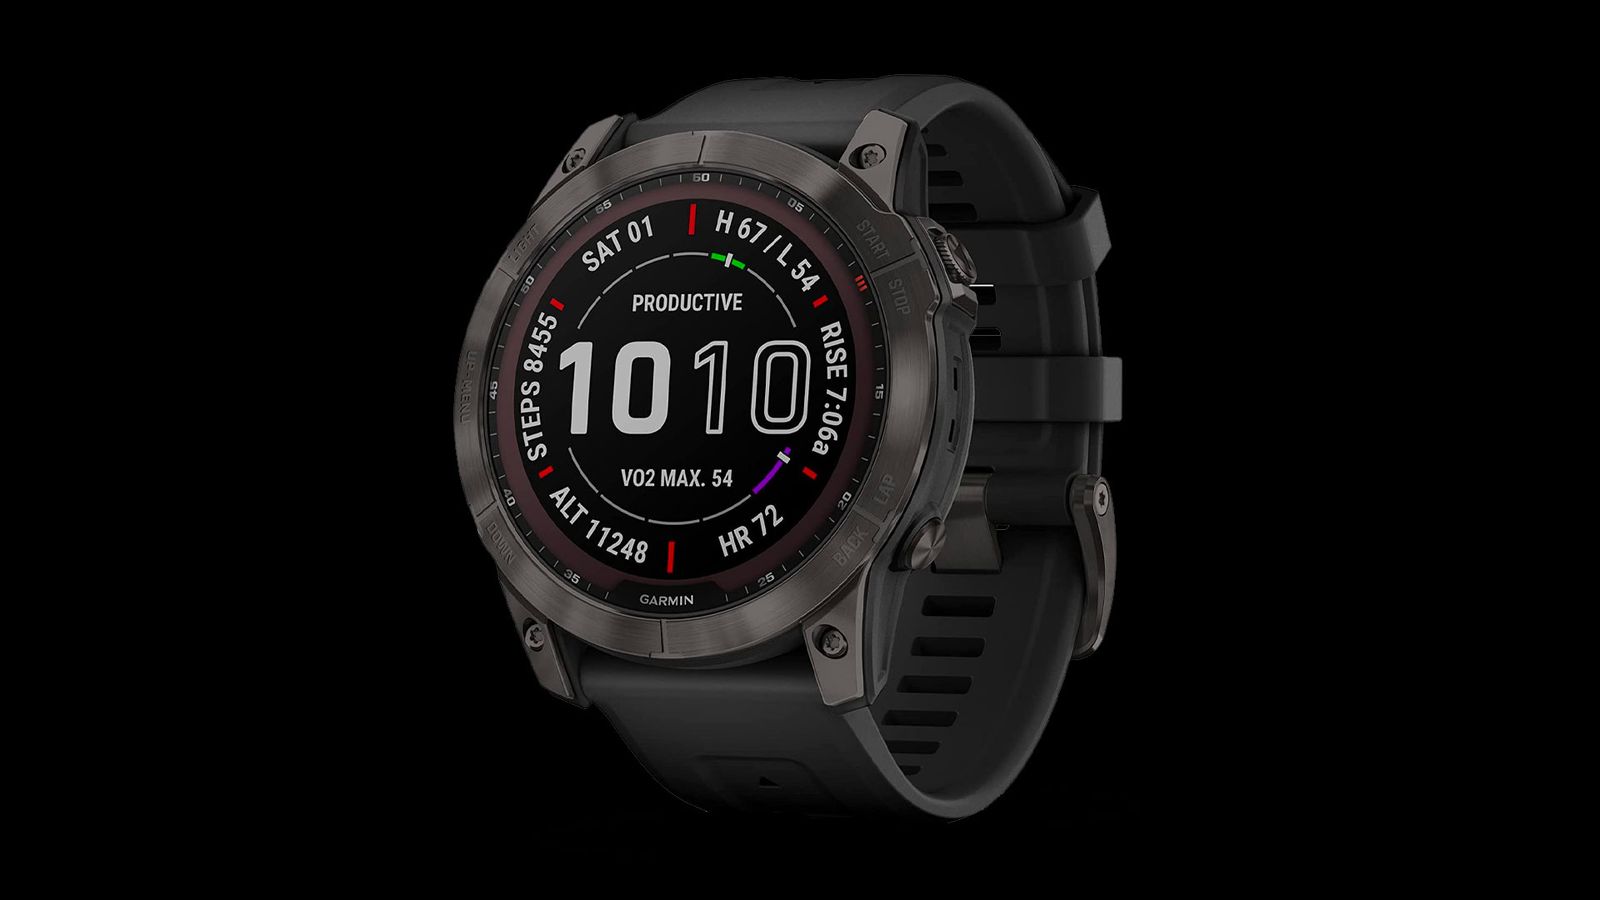 Best fitness trackers and watches - Garmin fēnix 7X product image of a black smartwatch with the time in white on the display.